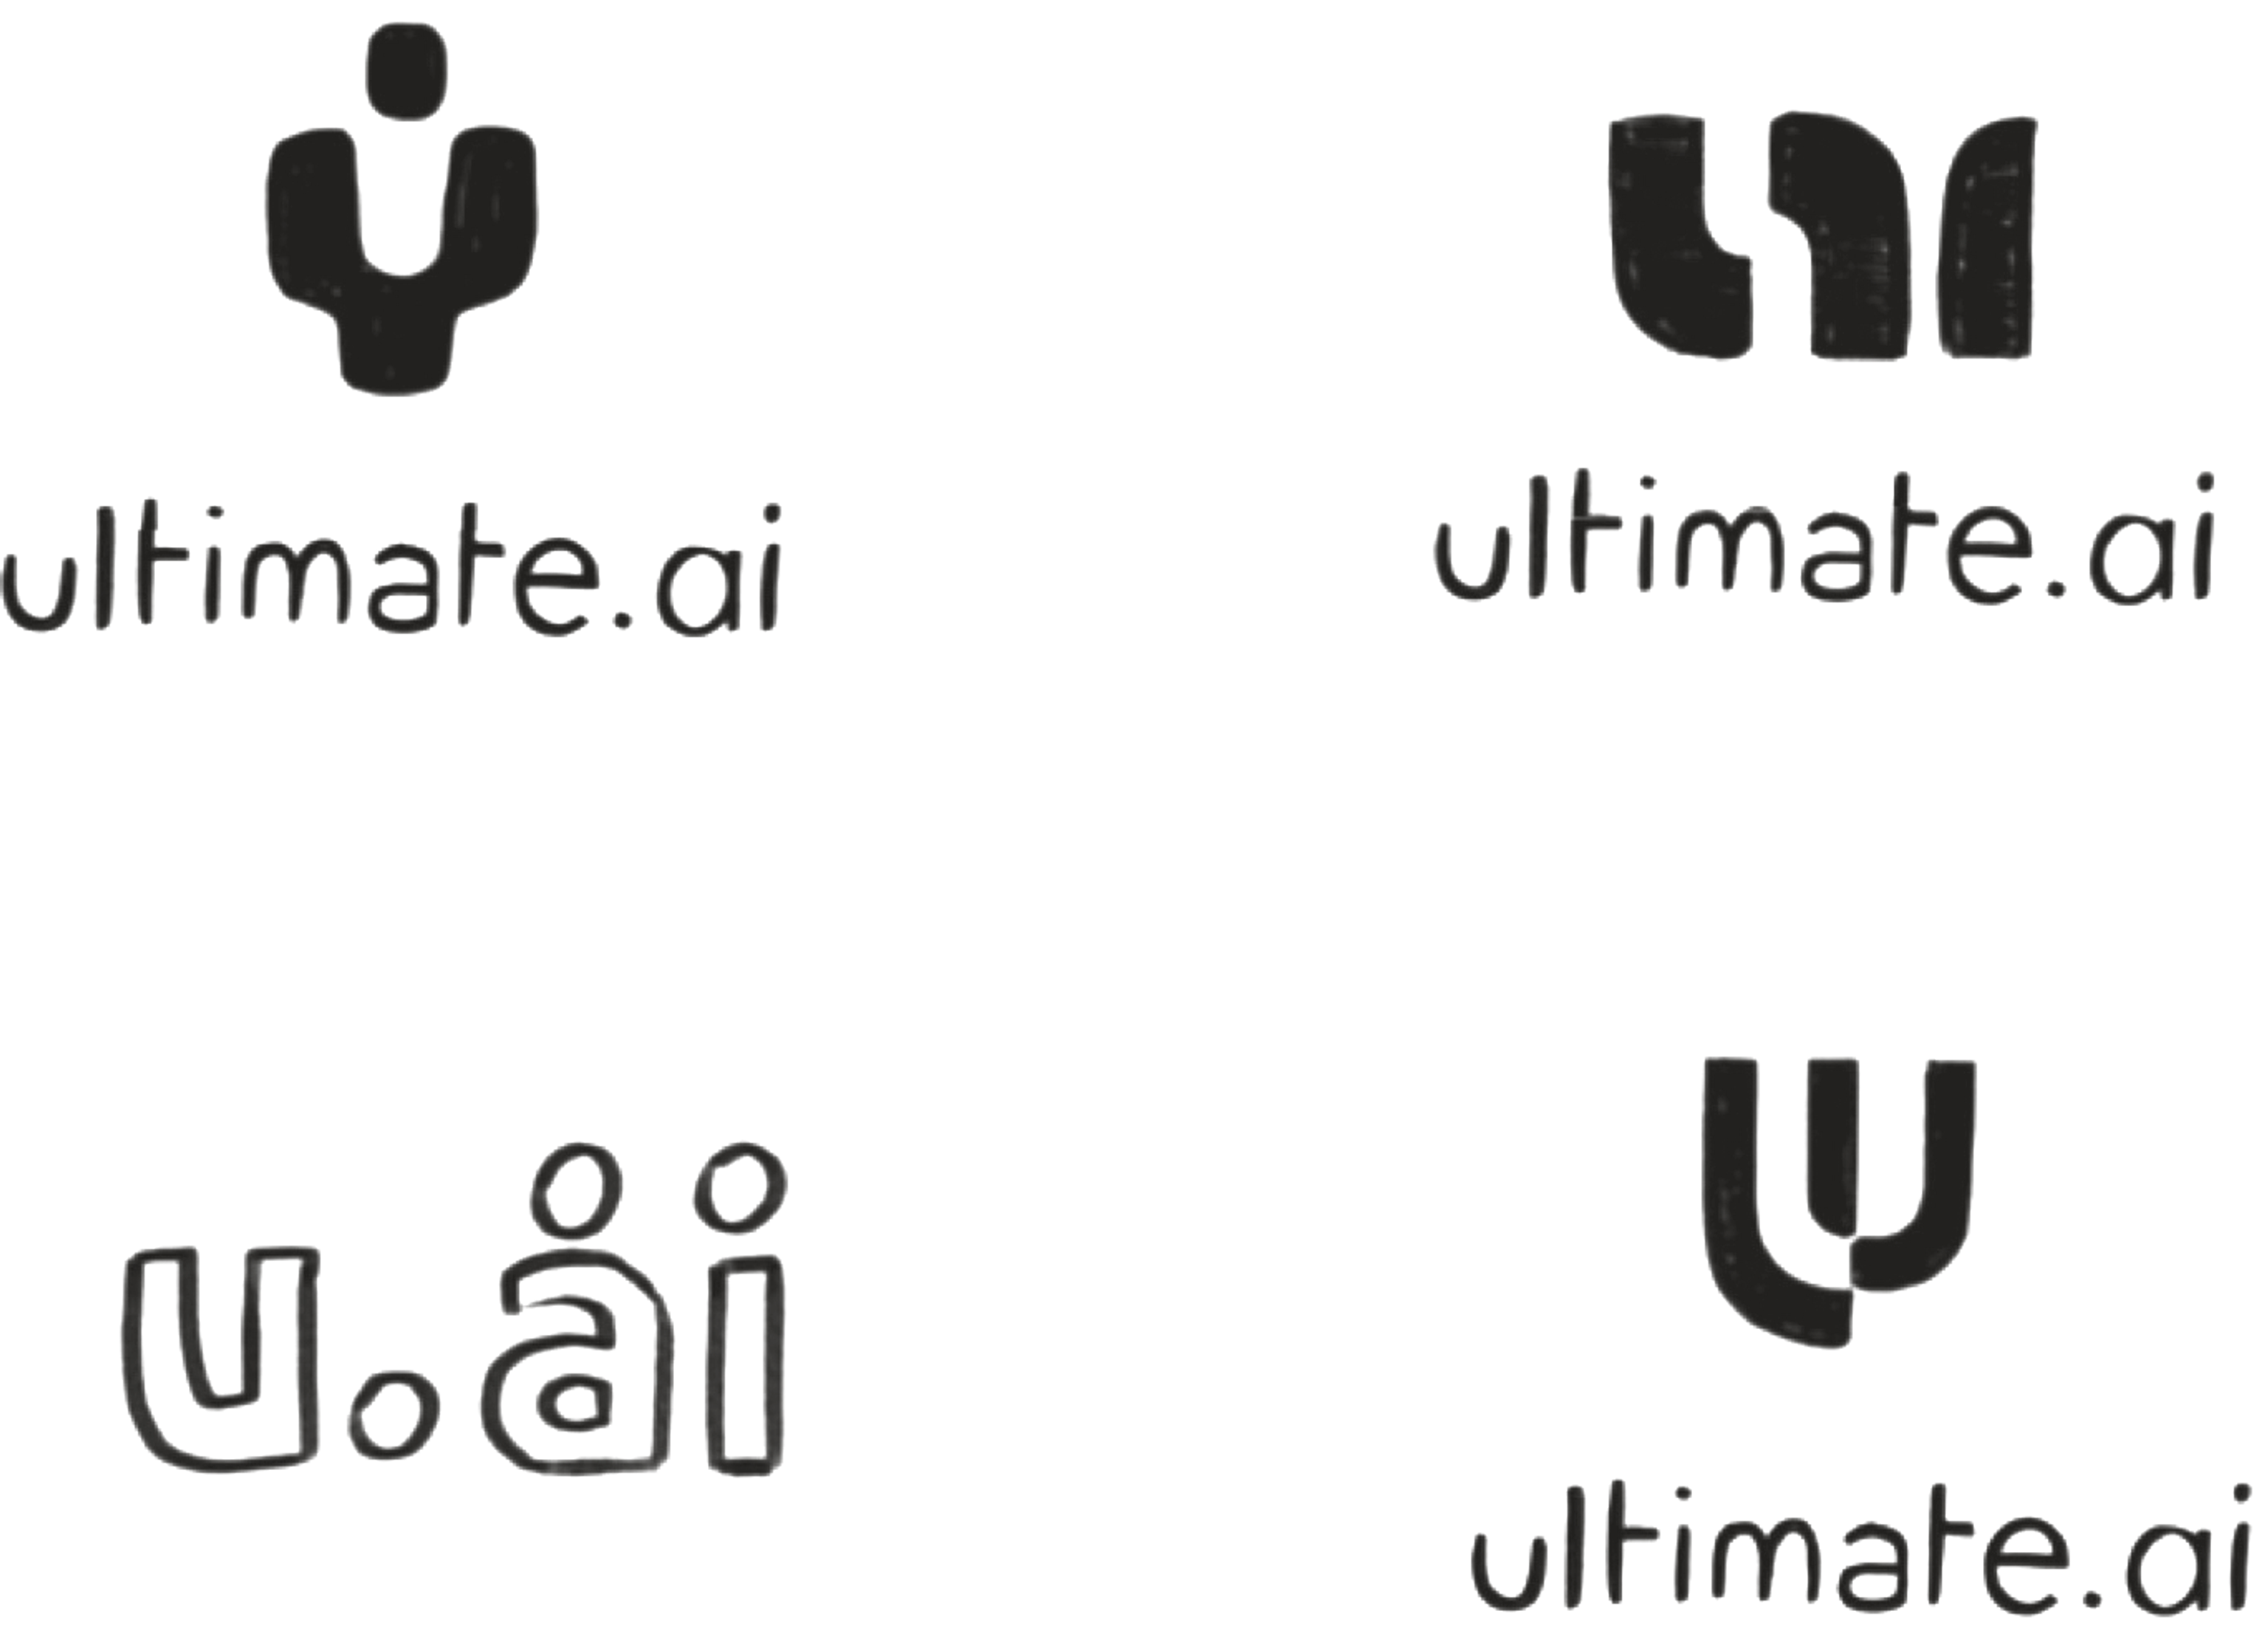 Logo Shortlist for Ultimate.ai by Function & form